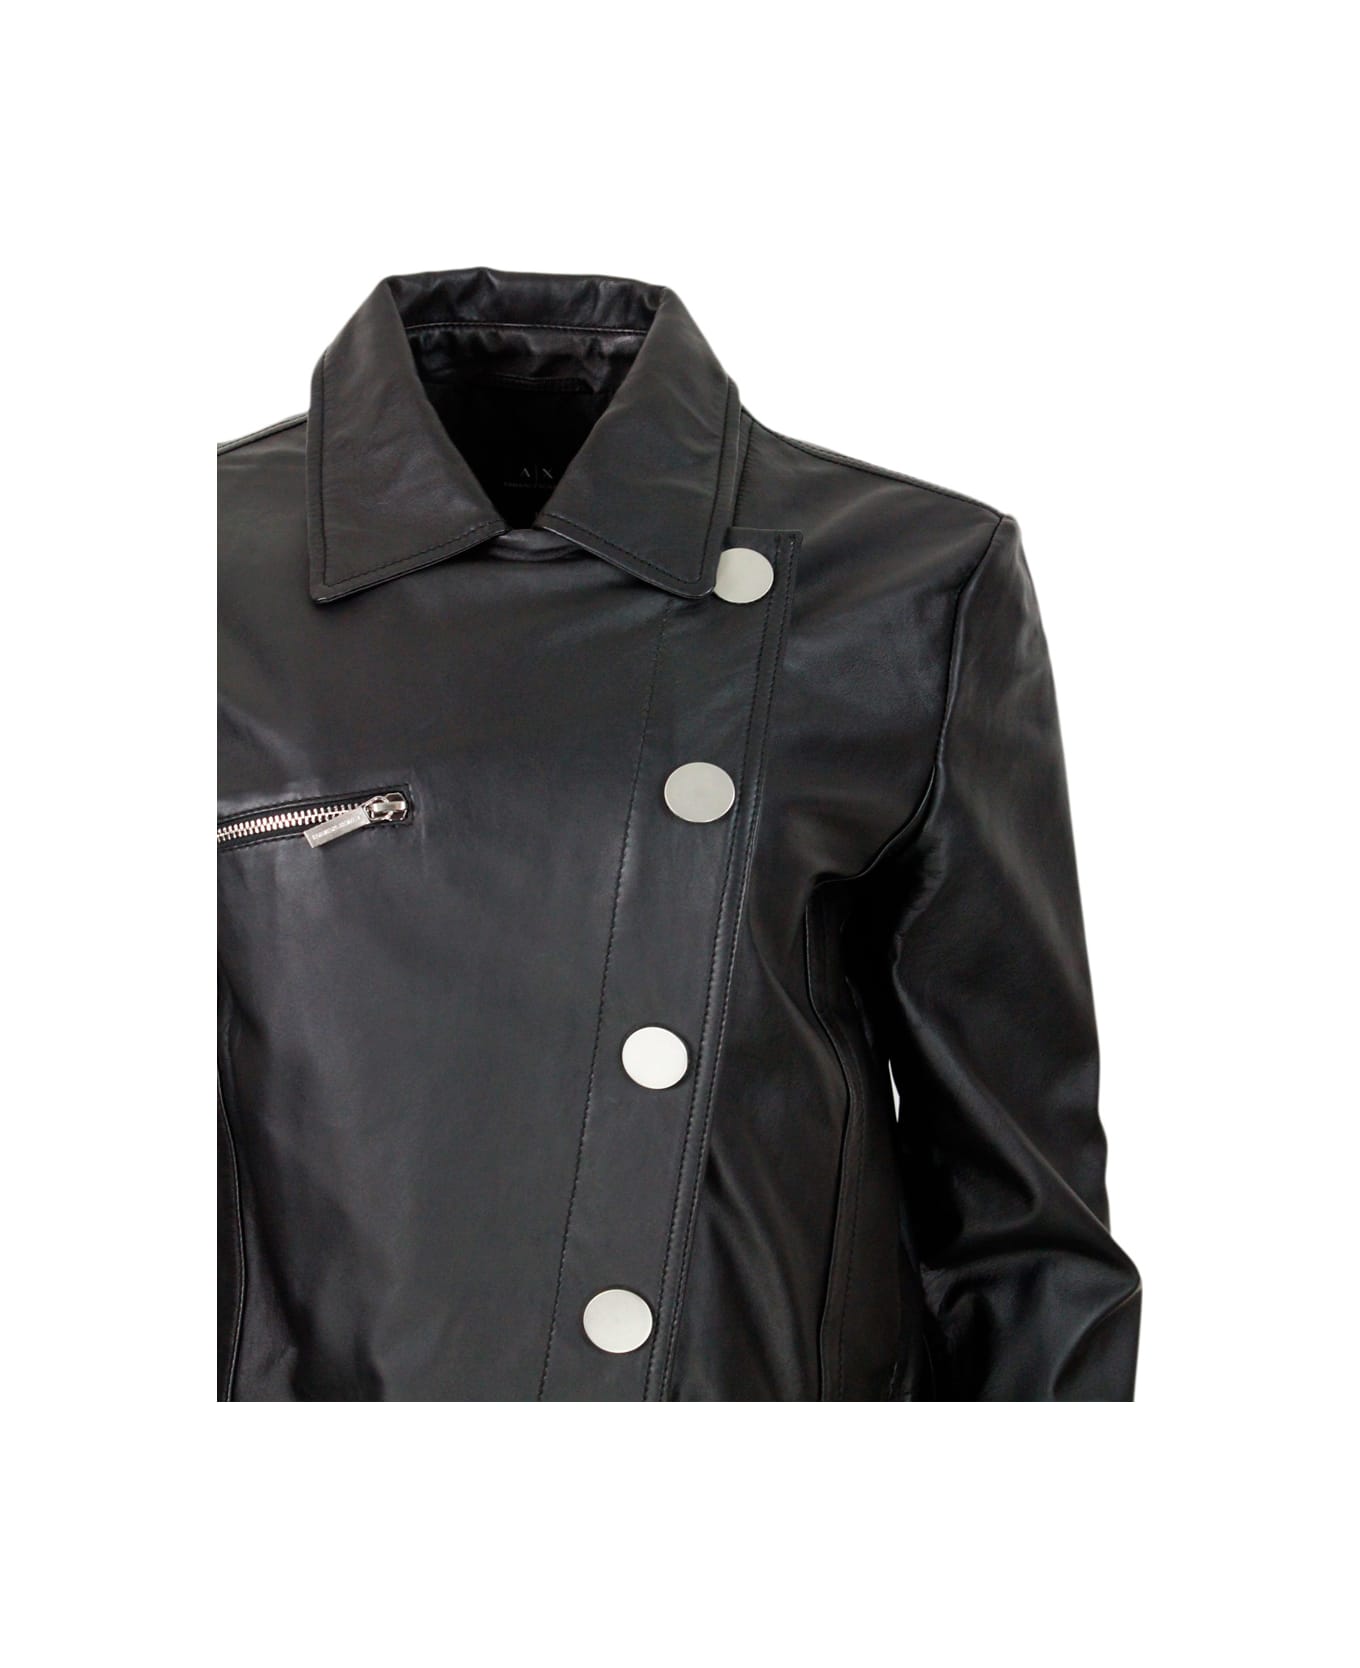 Armani unisexe Collezioni Studded Jacket With Button And Zip Closure Made Of Eco-leather With Zip On Pocket And Cuffs - Black